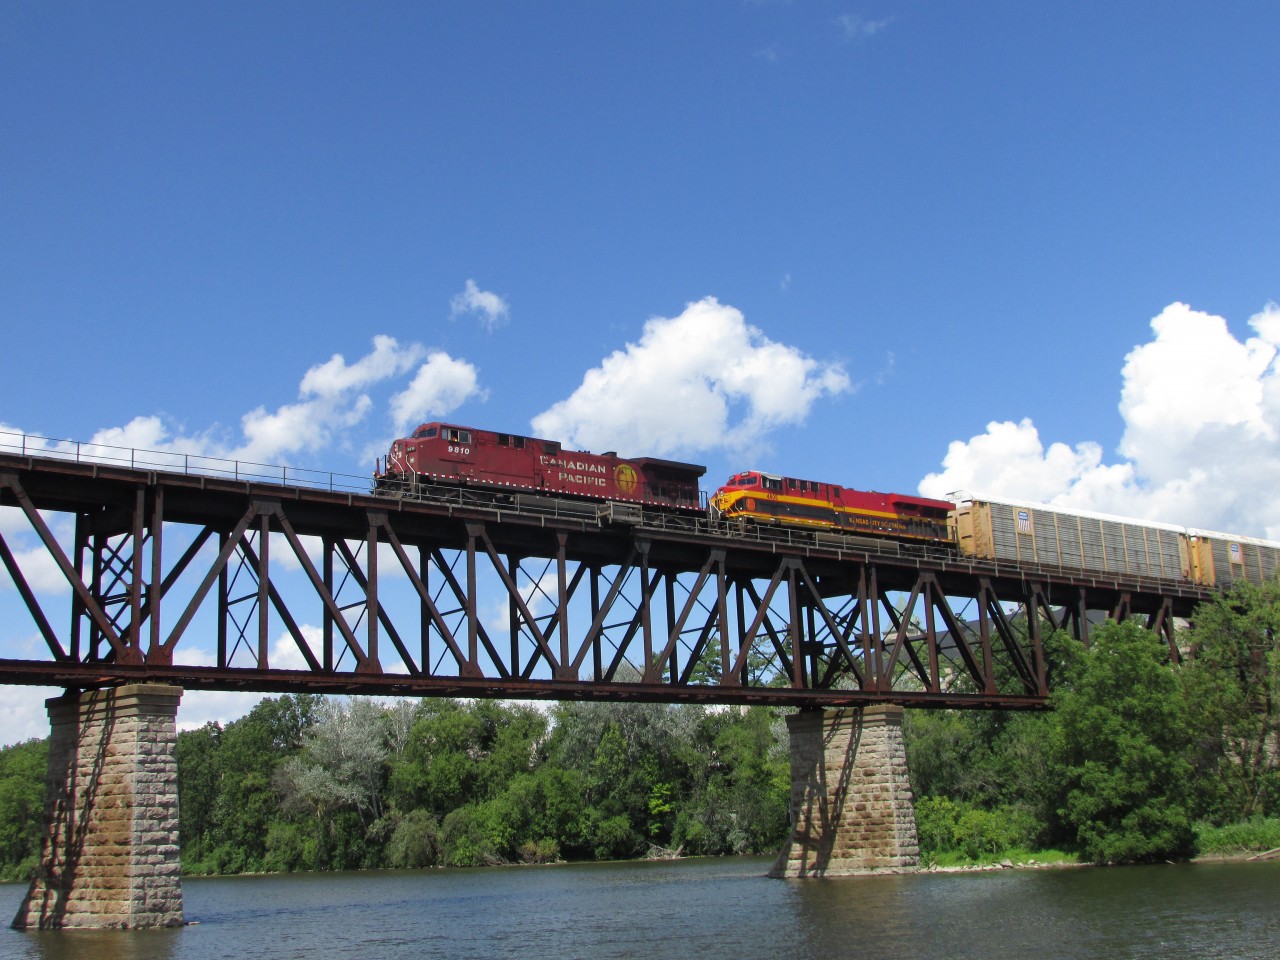 This is where the Canadian pacific Galt subdivision crosses the grand river in Cambridge Ontario Canada. Really good spot to watch trains at! This photo shows CP 241 crossing the bridge with Kansas city southern 4805 in trail.